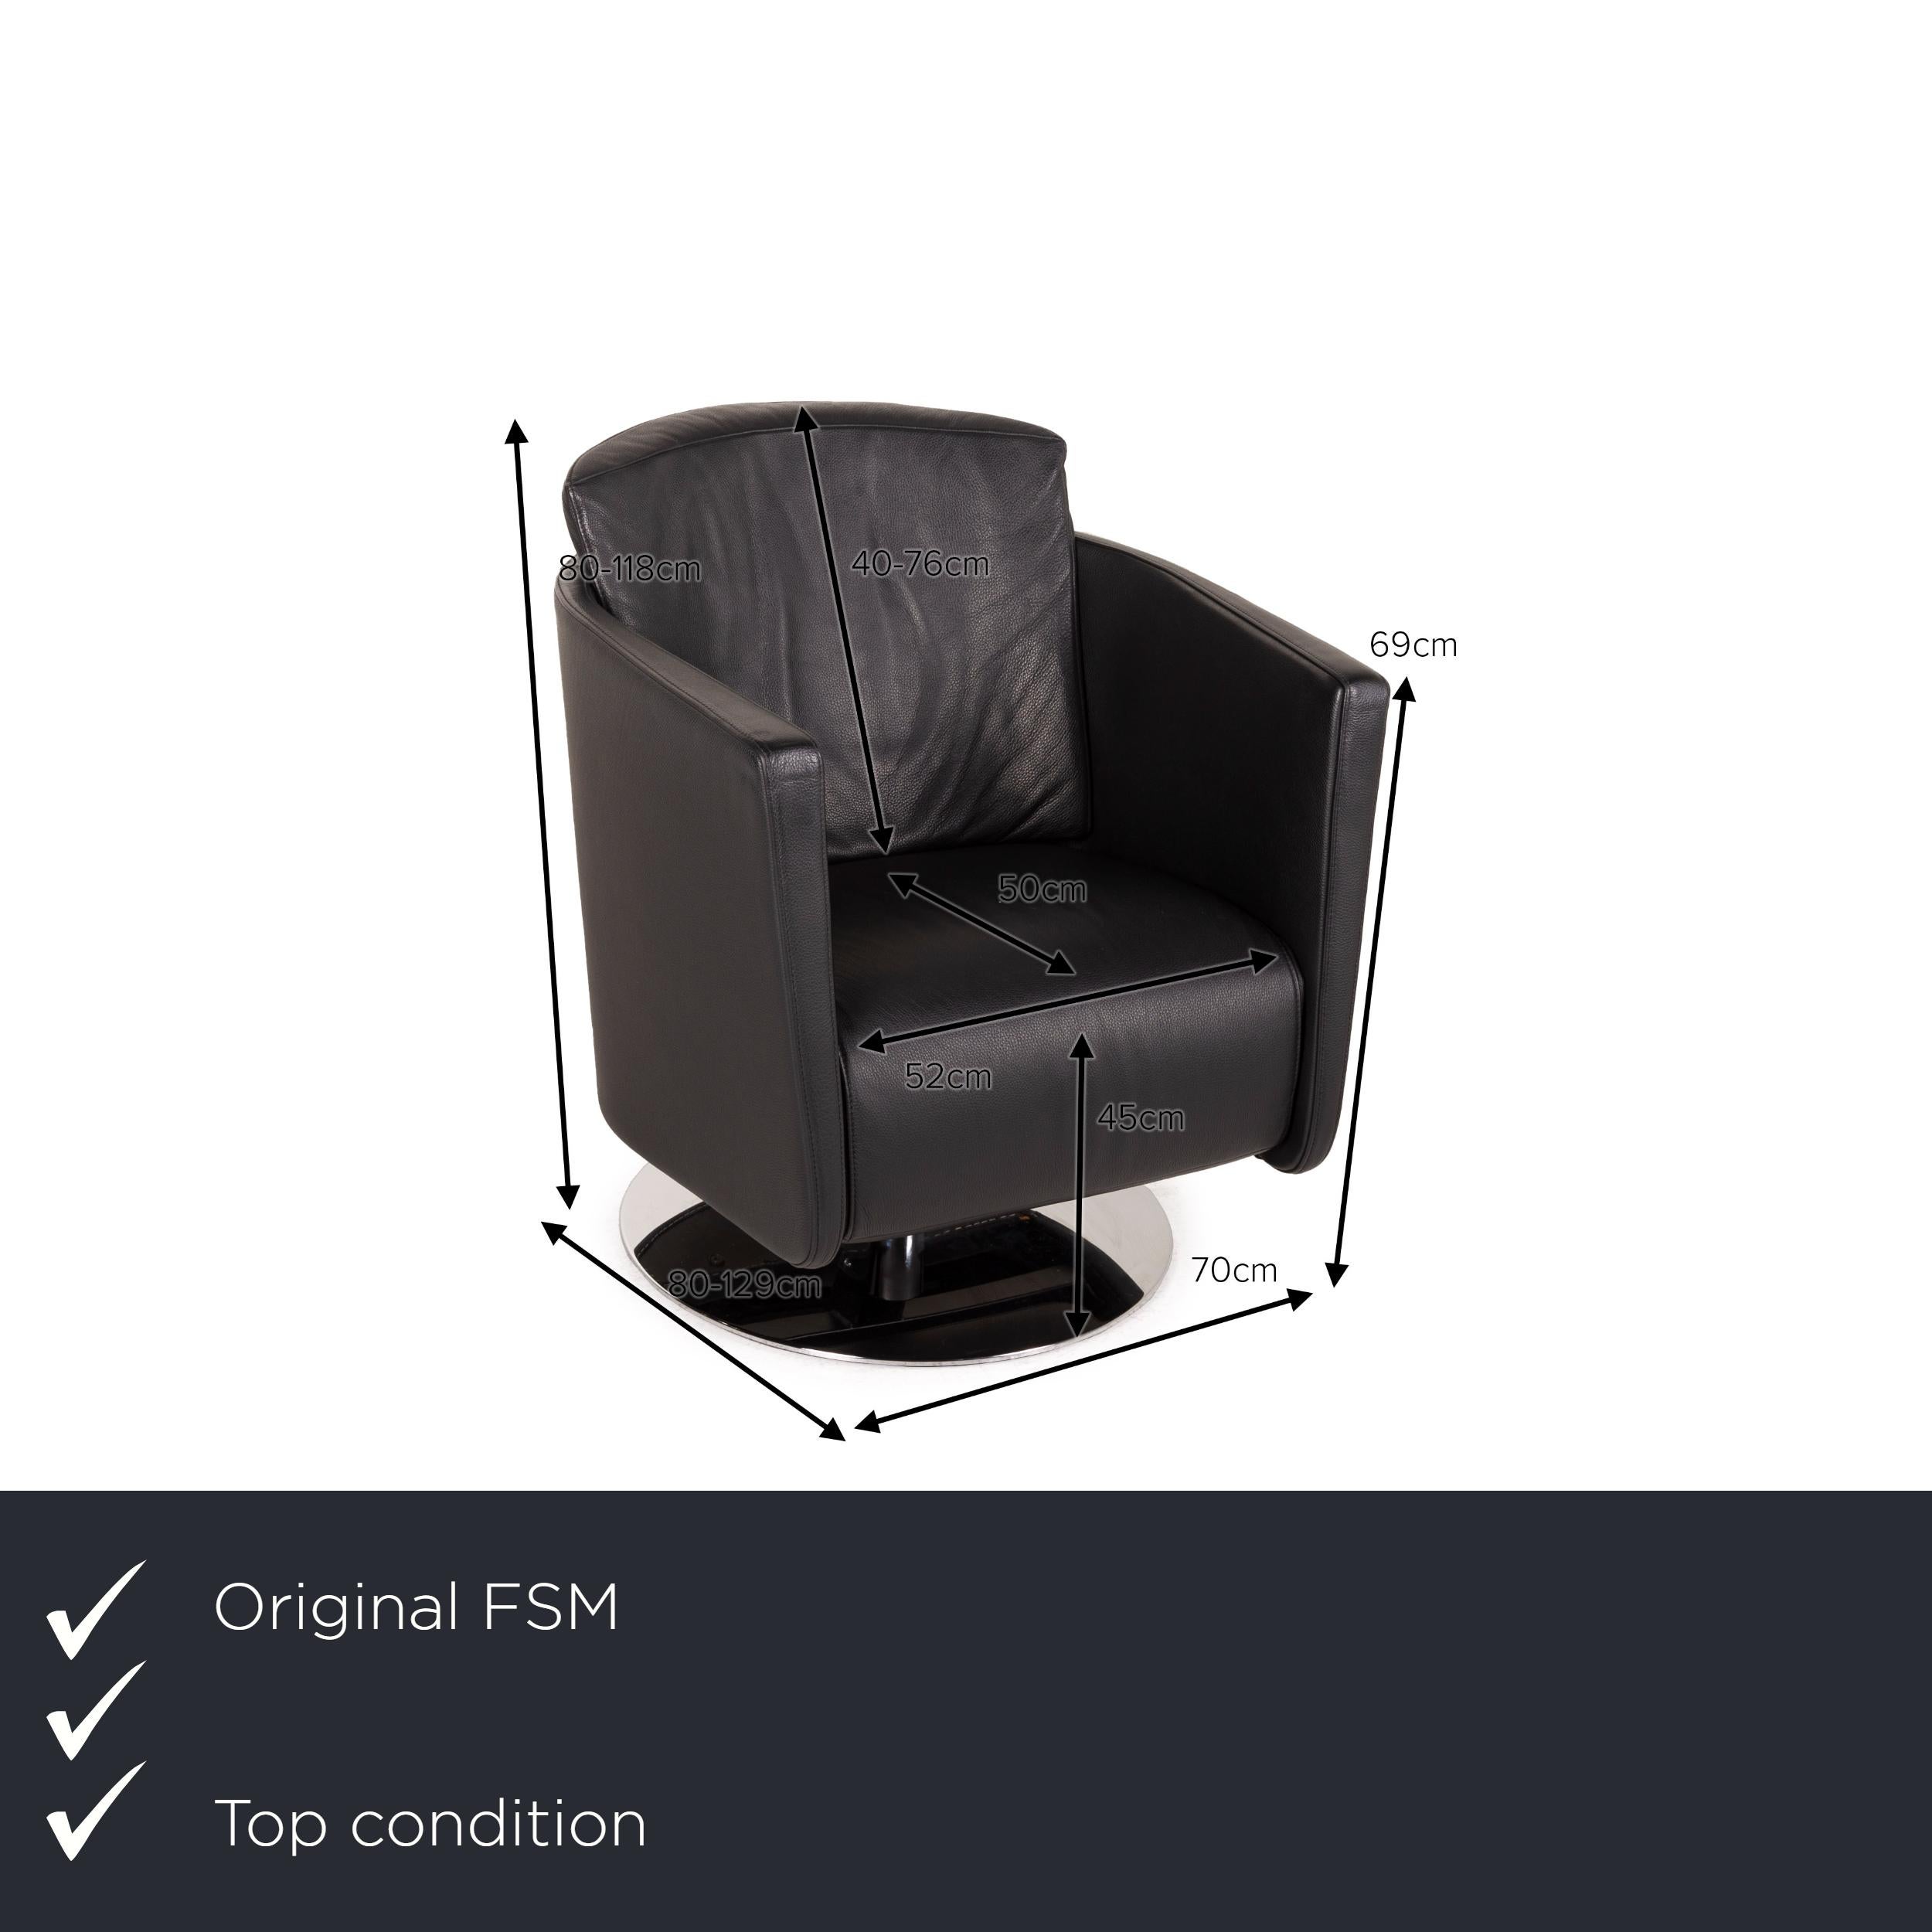 We present to you a FSM Just leather armchair black relaxation function.
  
 

 Product measurements in centimeters:
 

 depth: 80
 width: 70
 height: 80
 seat height: 45
 rest height: 69
 seat depth: 50
 seat width: 52
 back height: